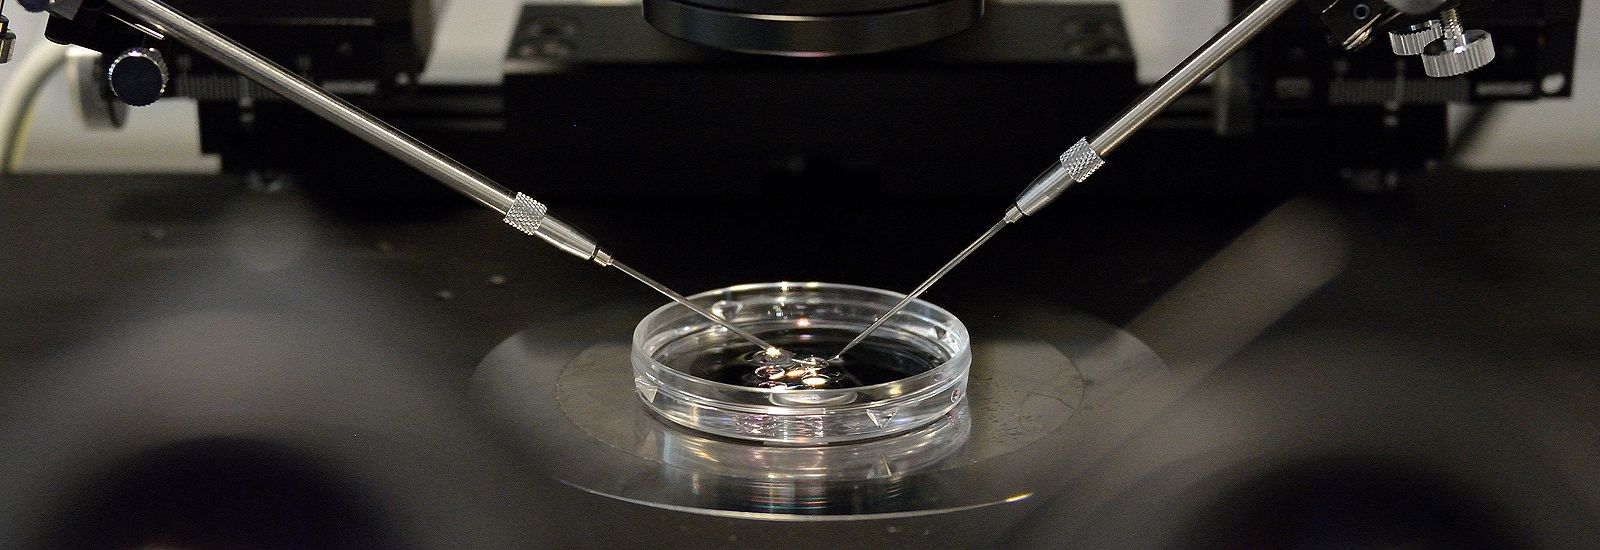 Close up of a Petri dish with two micromanipulators